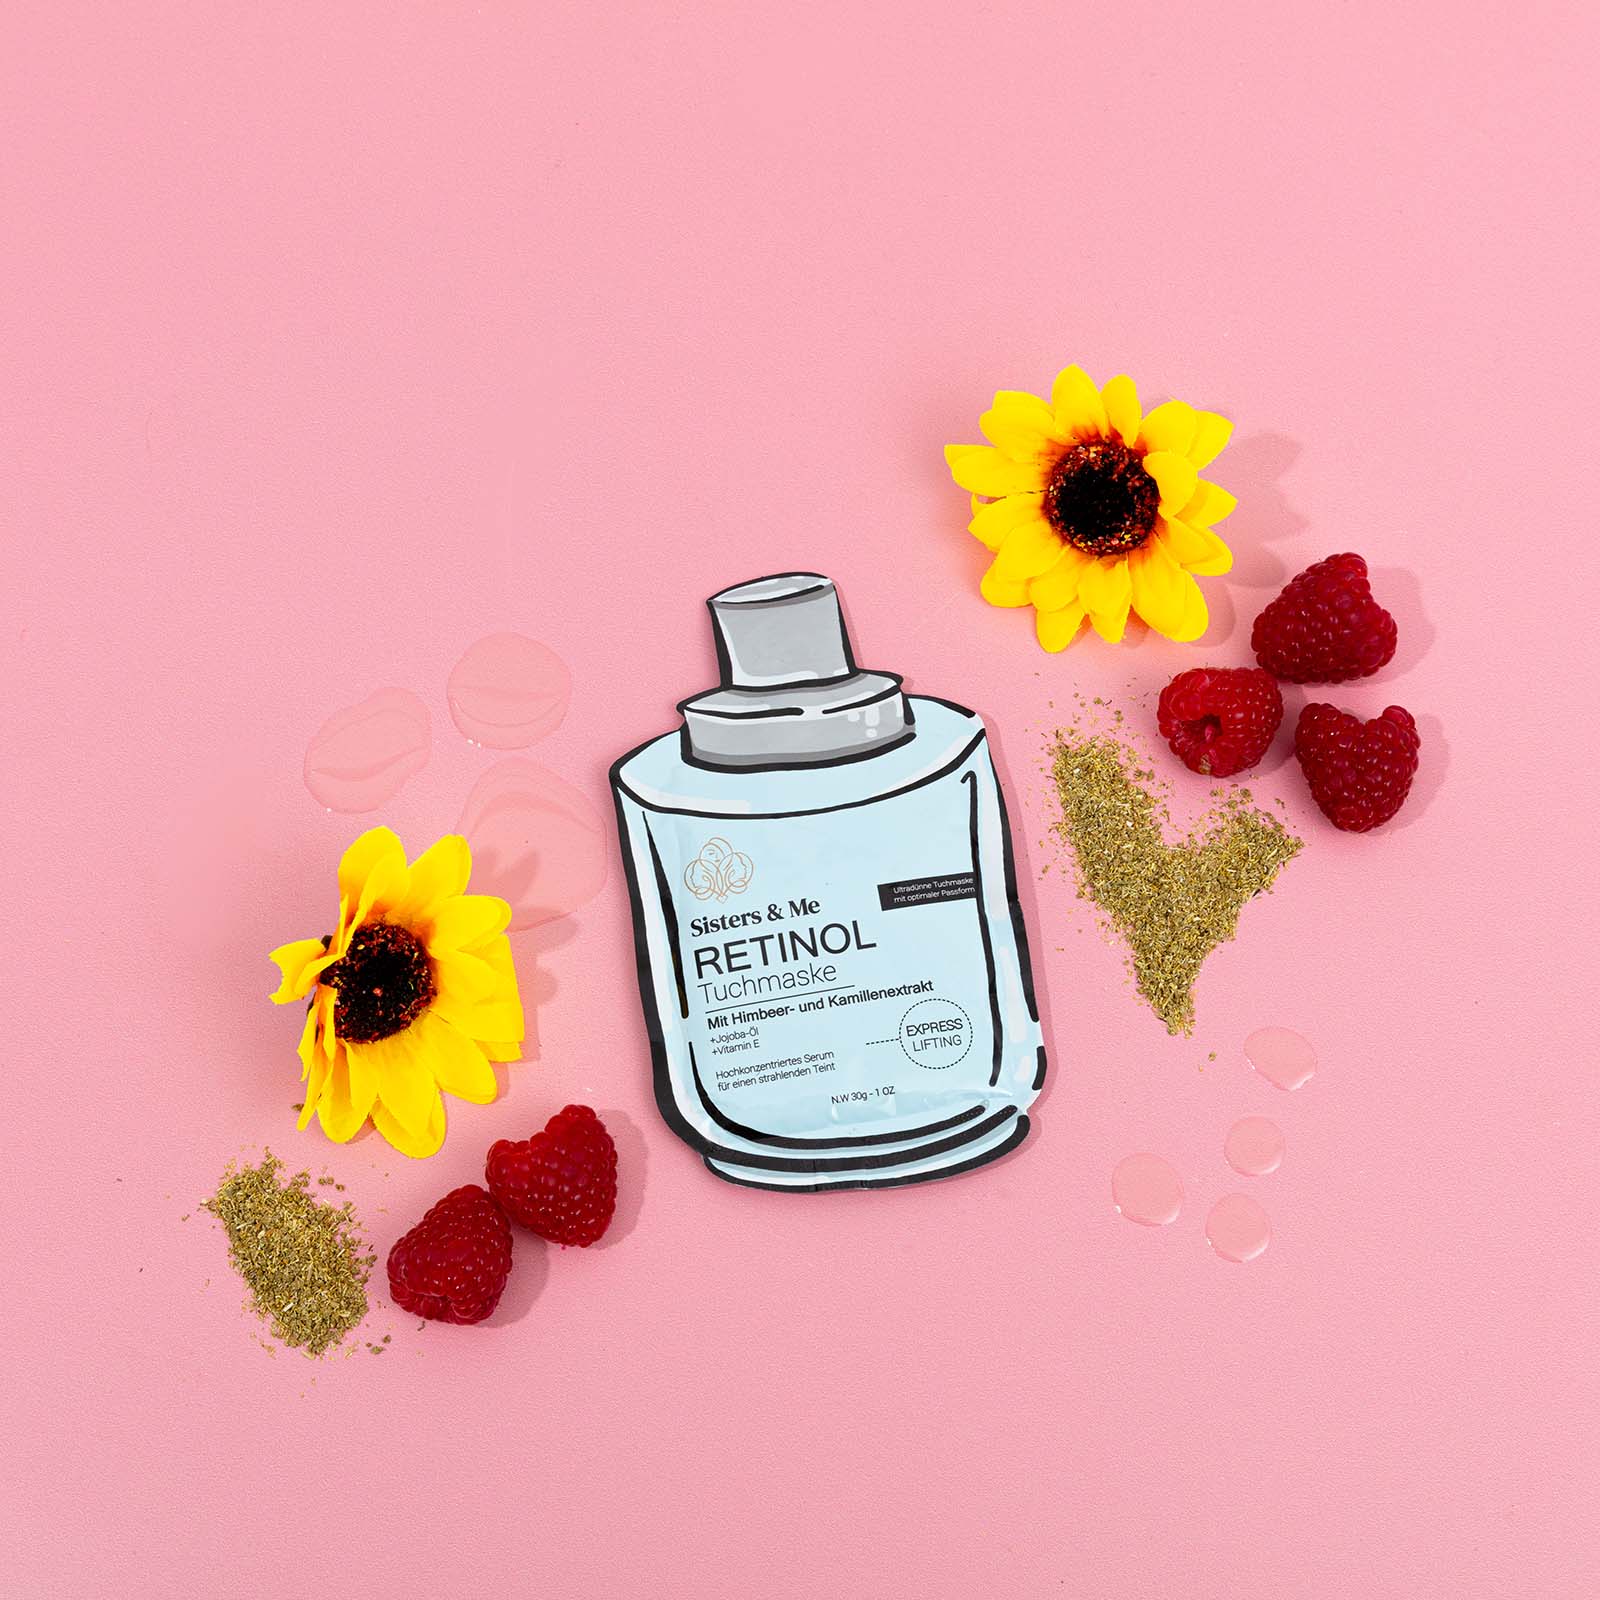 cute pink product photos for face mask brand sisters and me. Styled product stills by colourpop studio